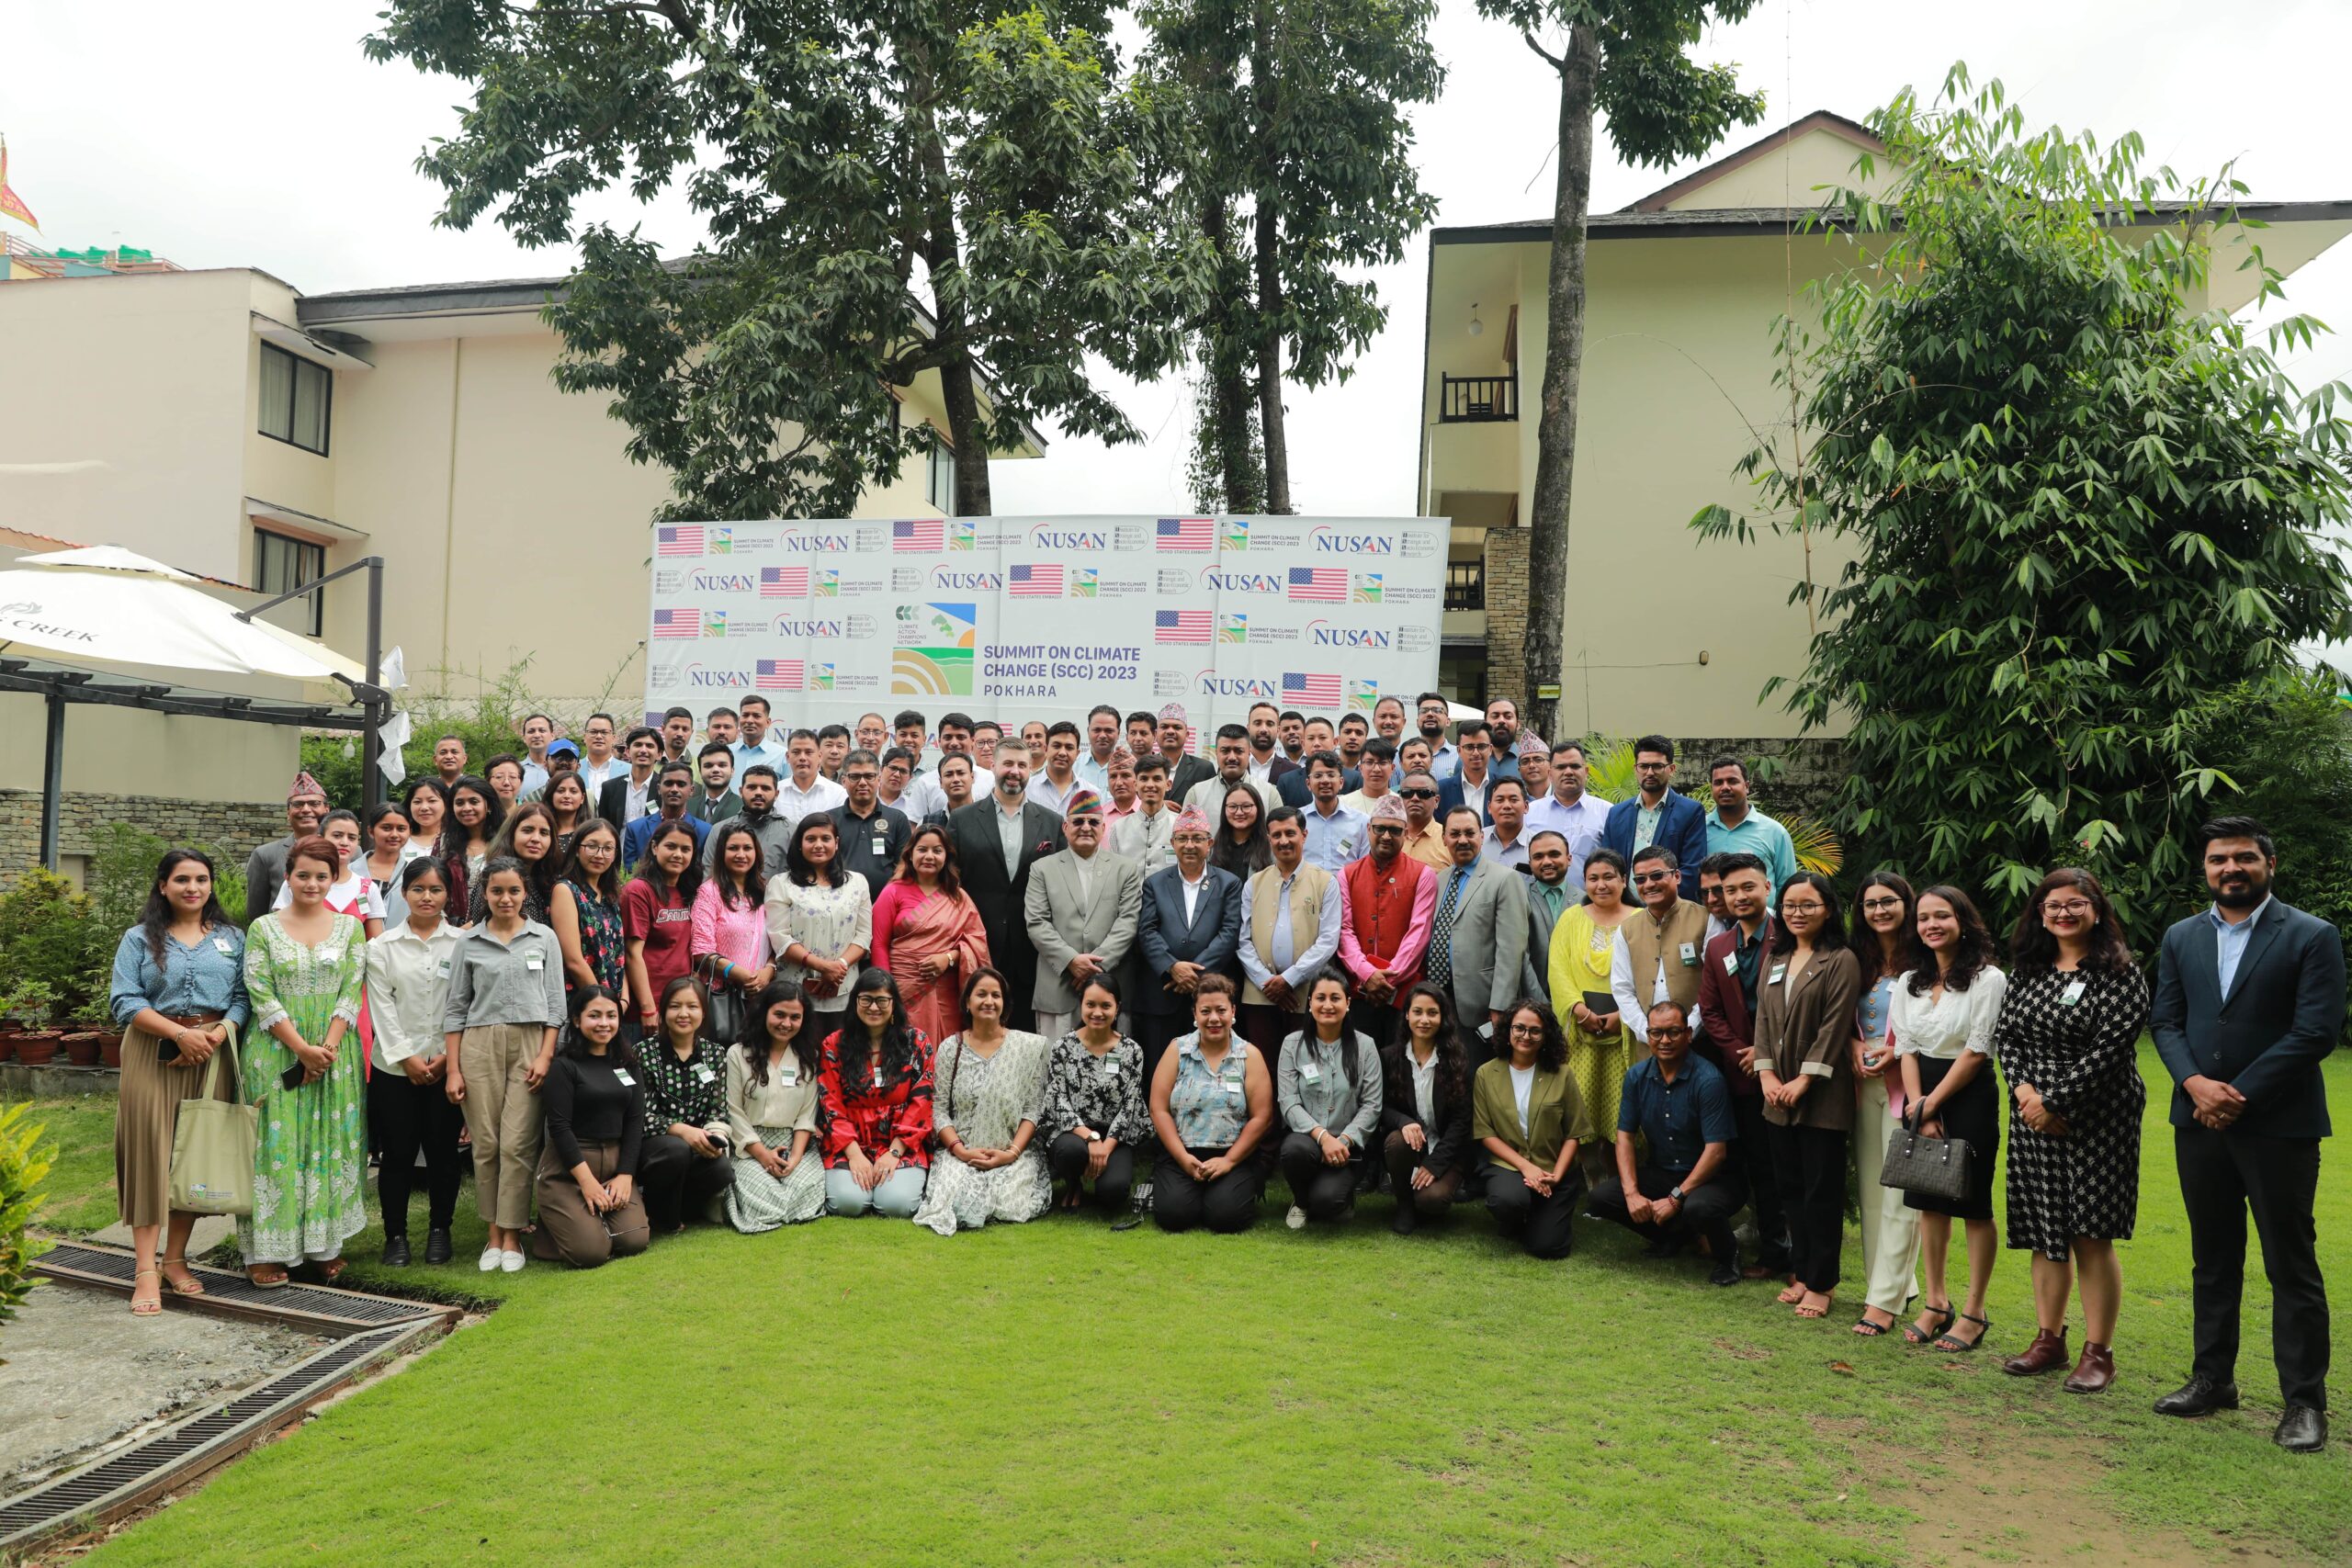 ISSR, NUSAN organize Summit on Climate Change in Pokhara